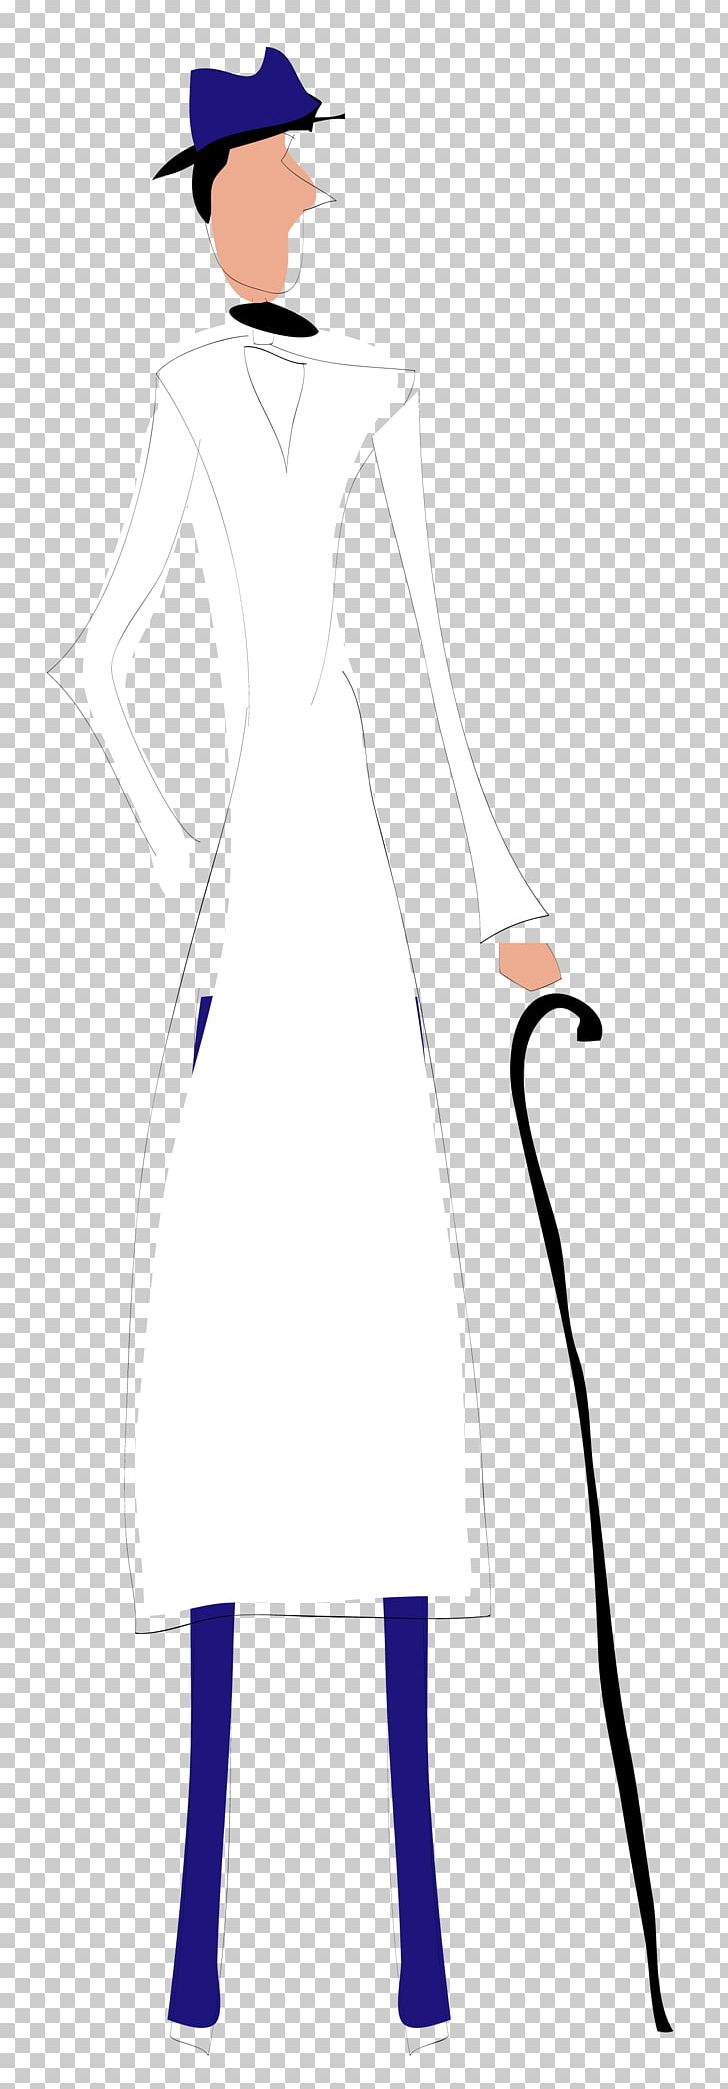 Dress Formal Wear Designer Uniform PNG, Clipart, Bow Tie, Fashion, Fashion Design, Fictional Character, Formal Wear Free PNG Download